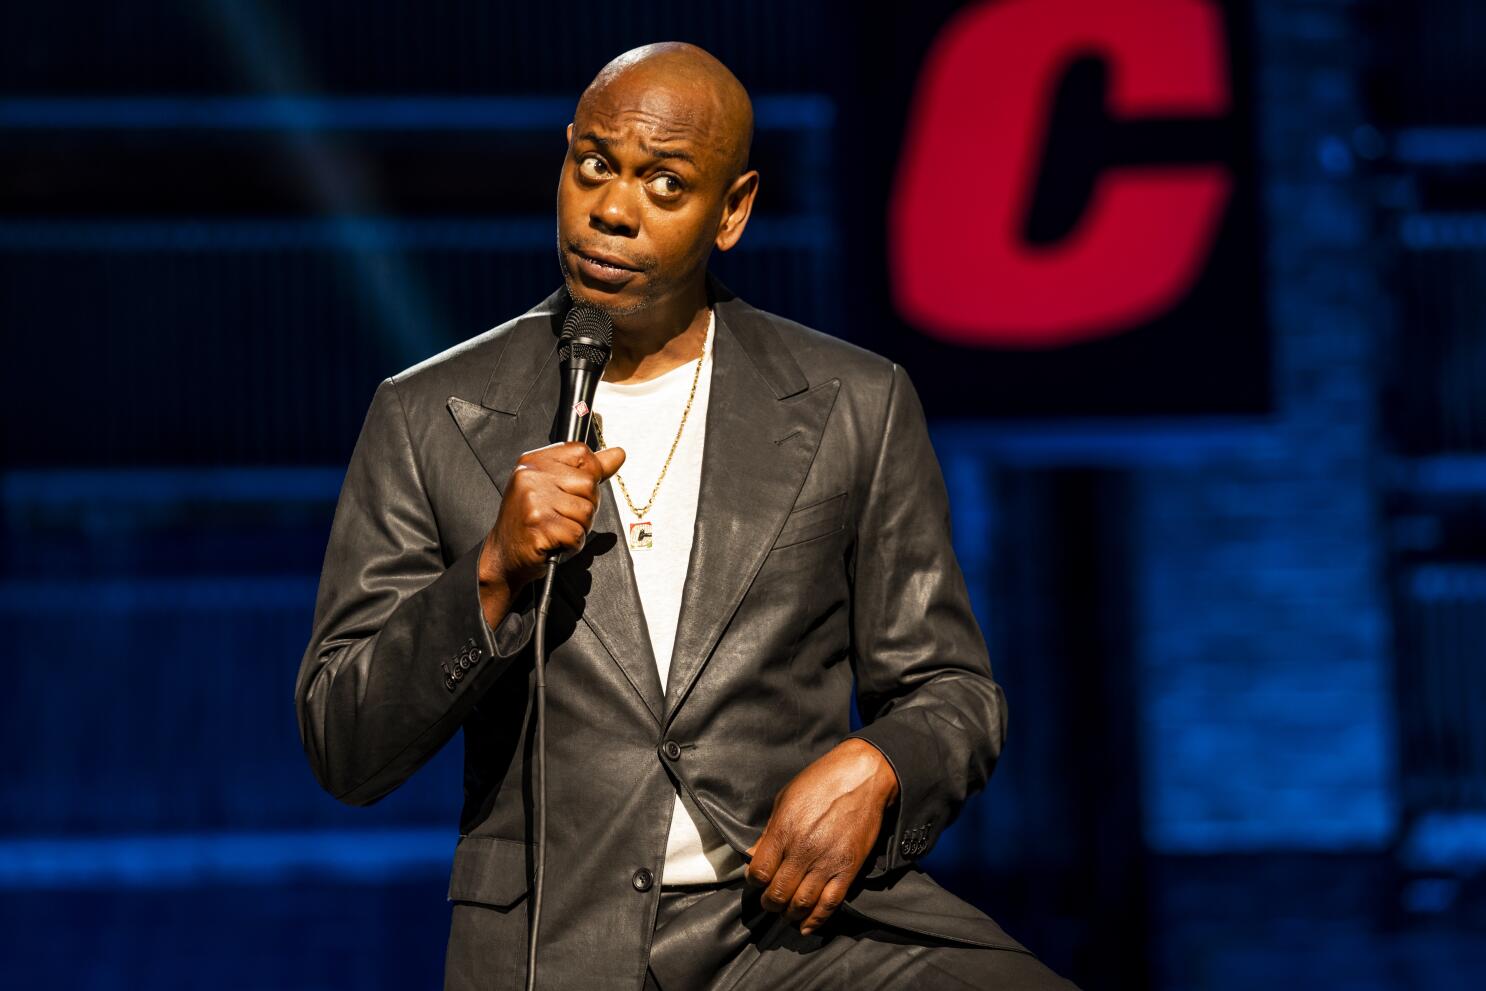 Dave Chapelle’s Net Worth